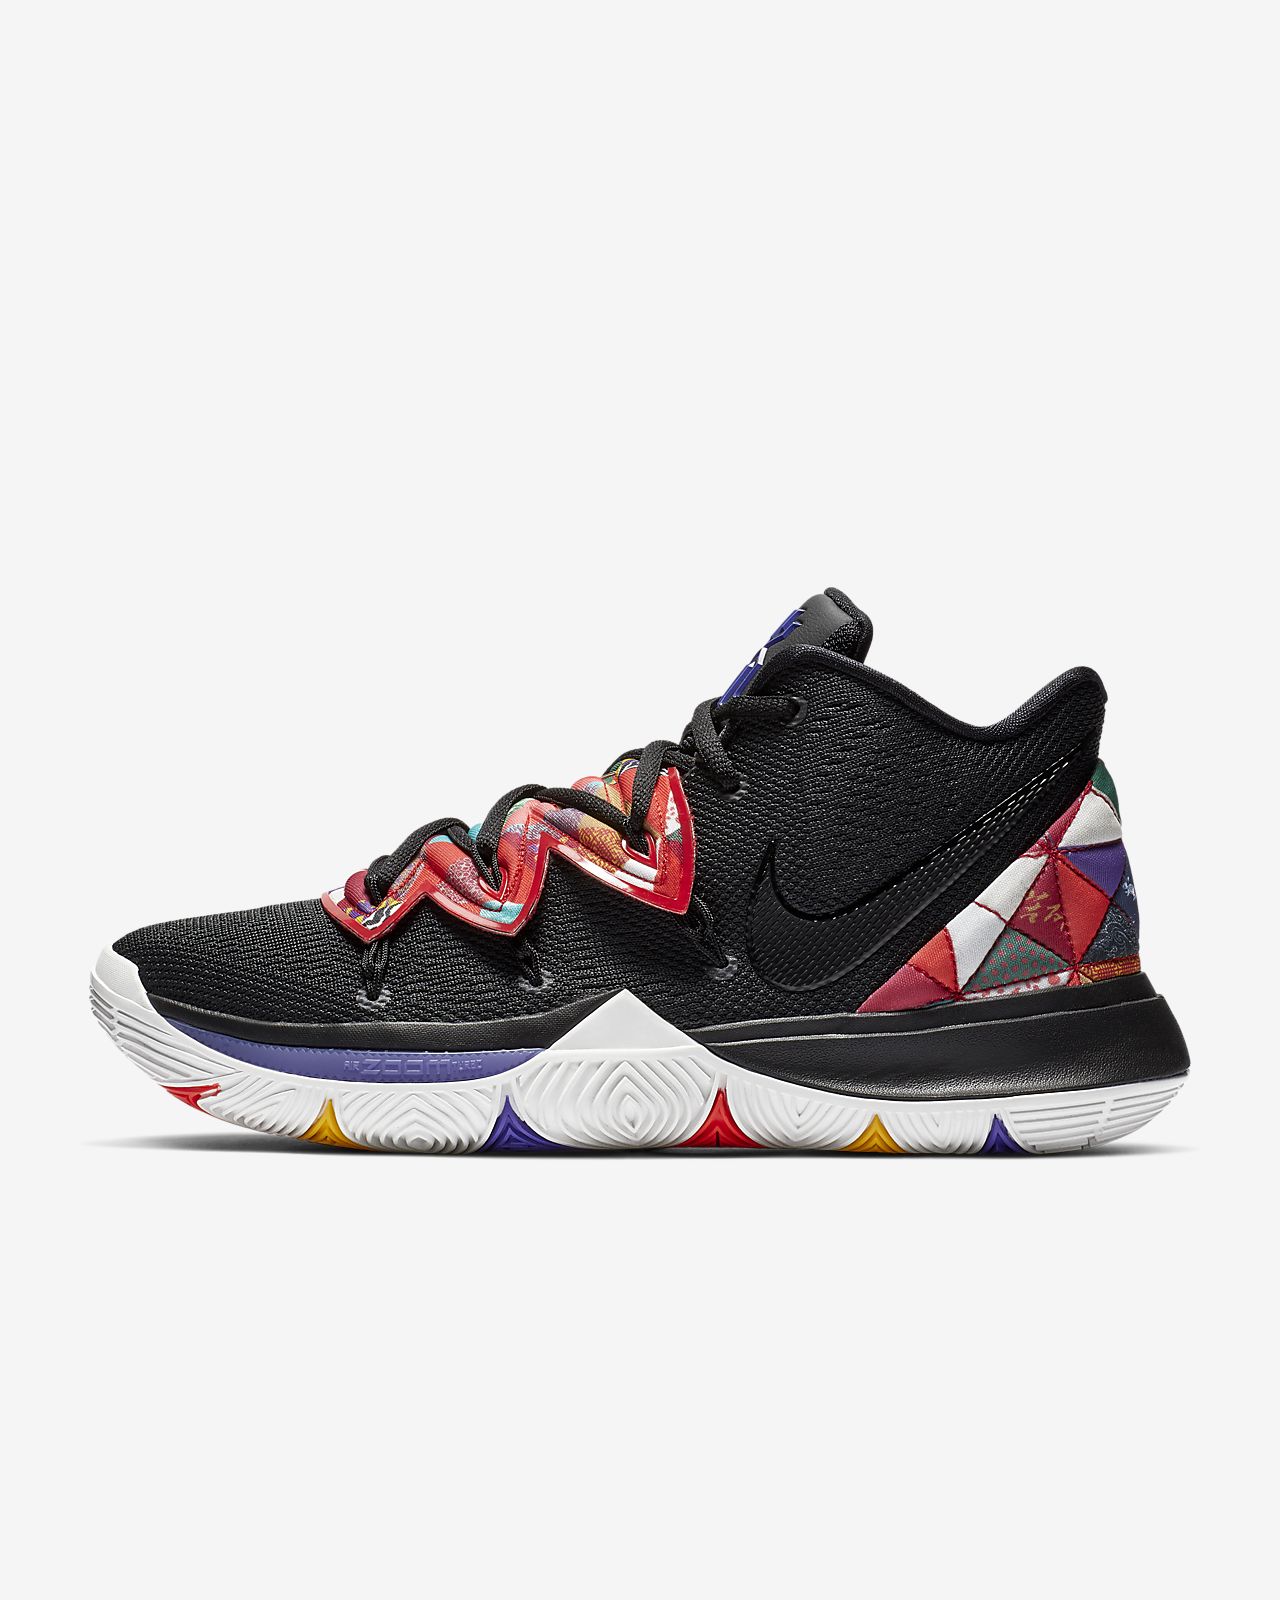 nike kyrie 5 donna rosse